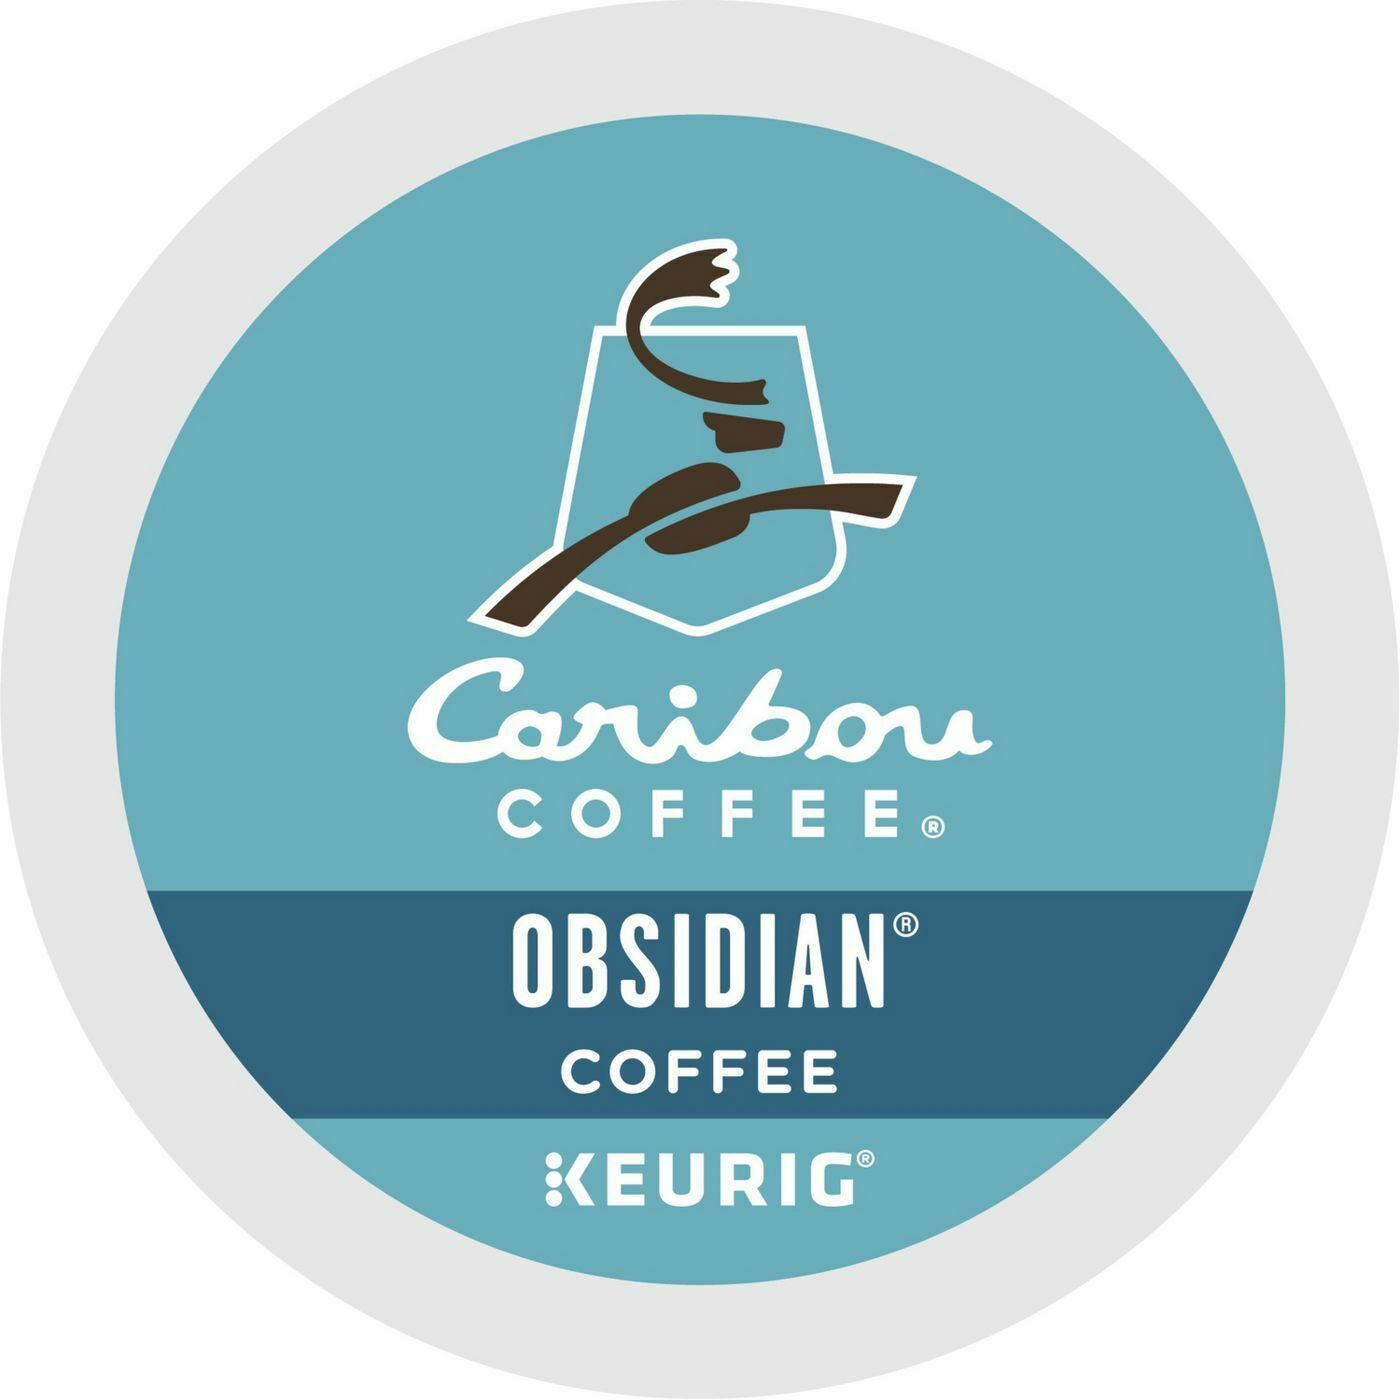 Caribou Obsidian Dark Roast Coffee 18 to 144 Keurig K cup Pods Pick Any Size - $19.89 - $119.89